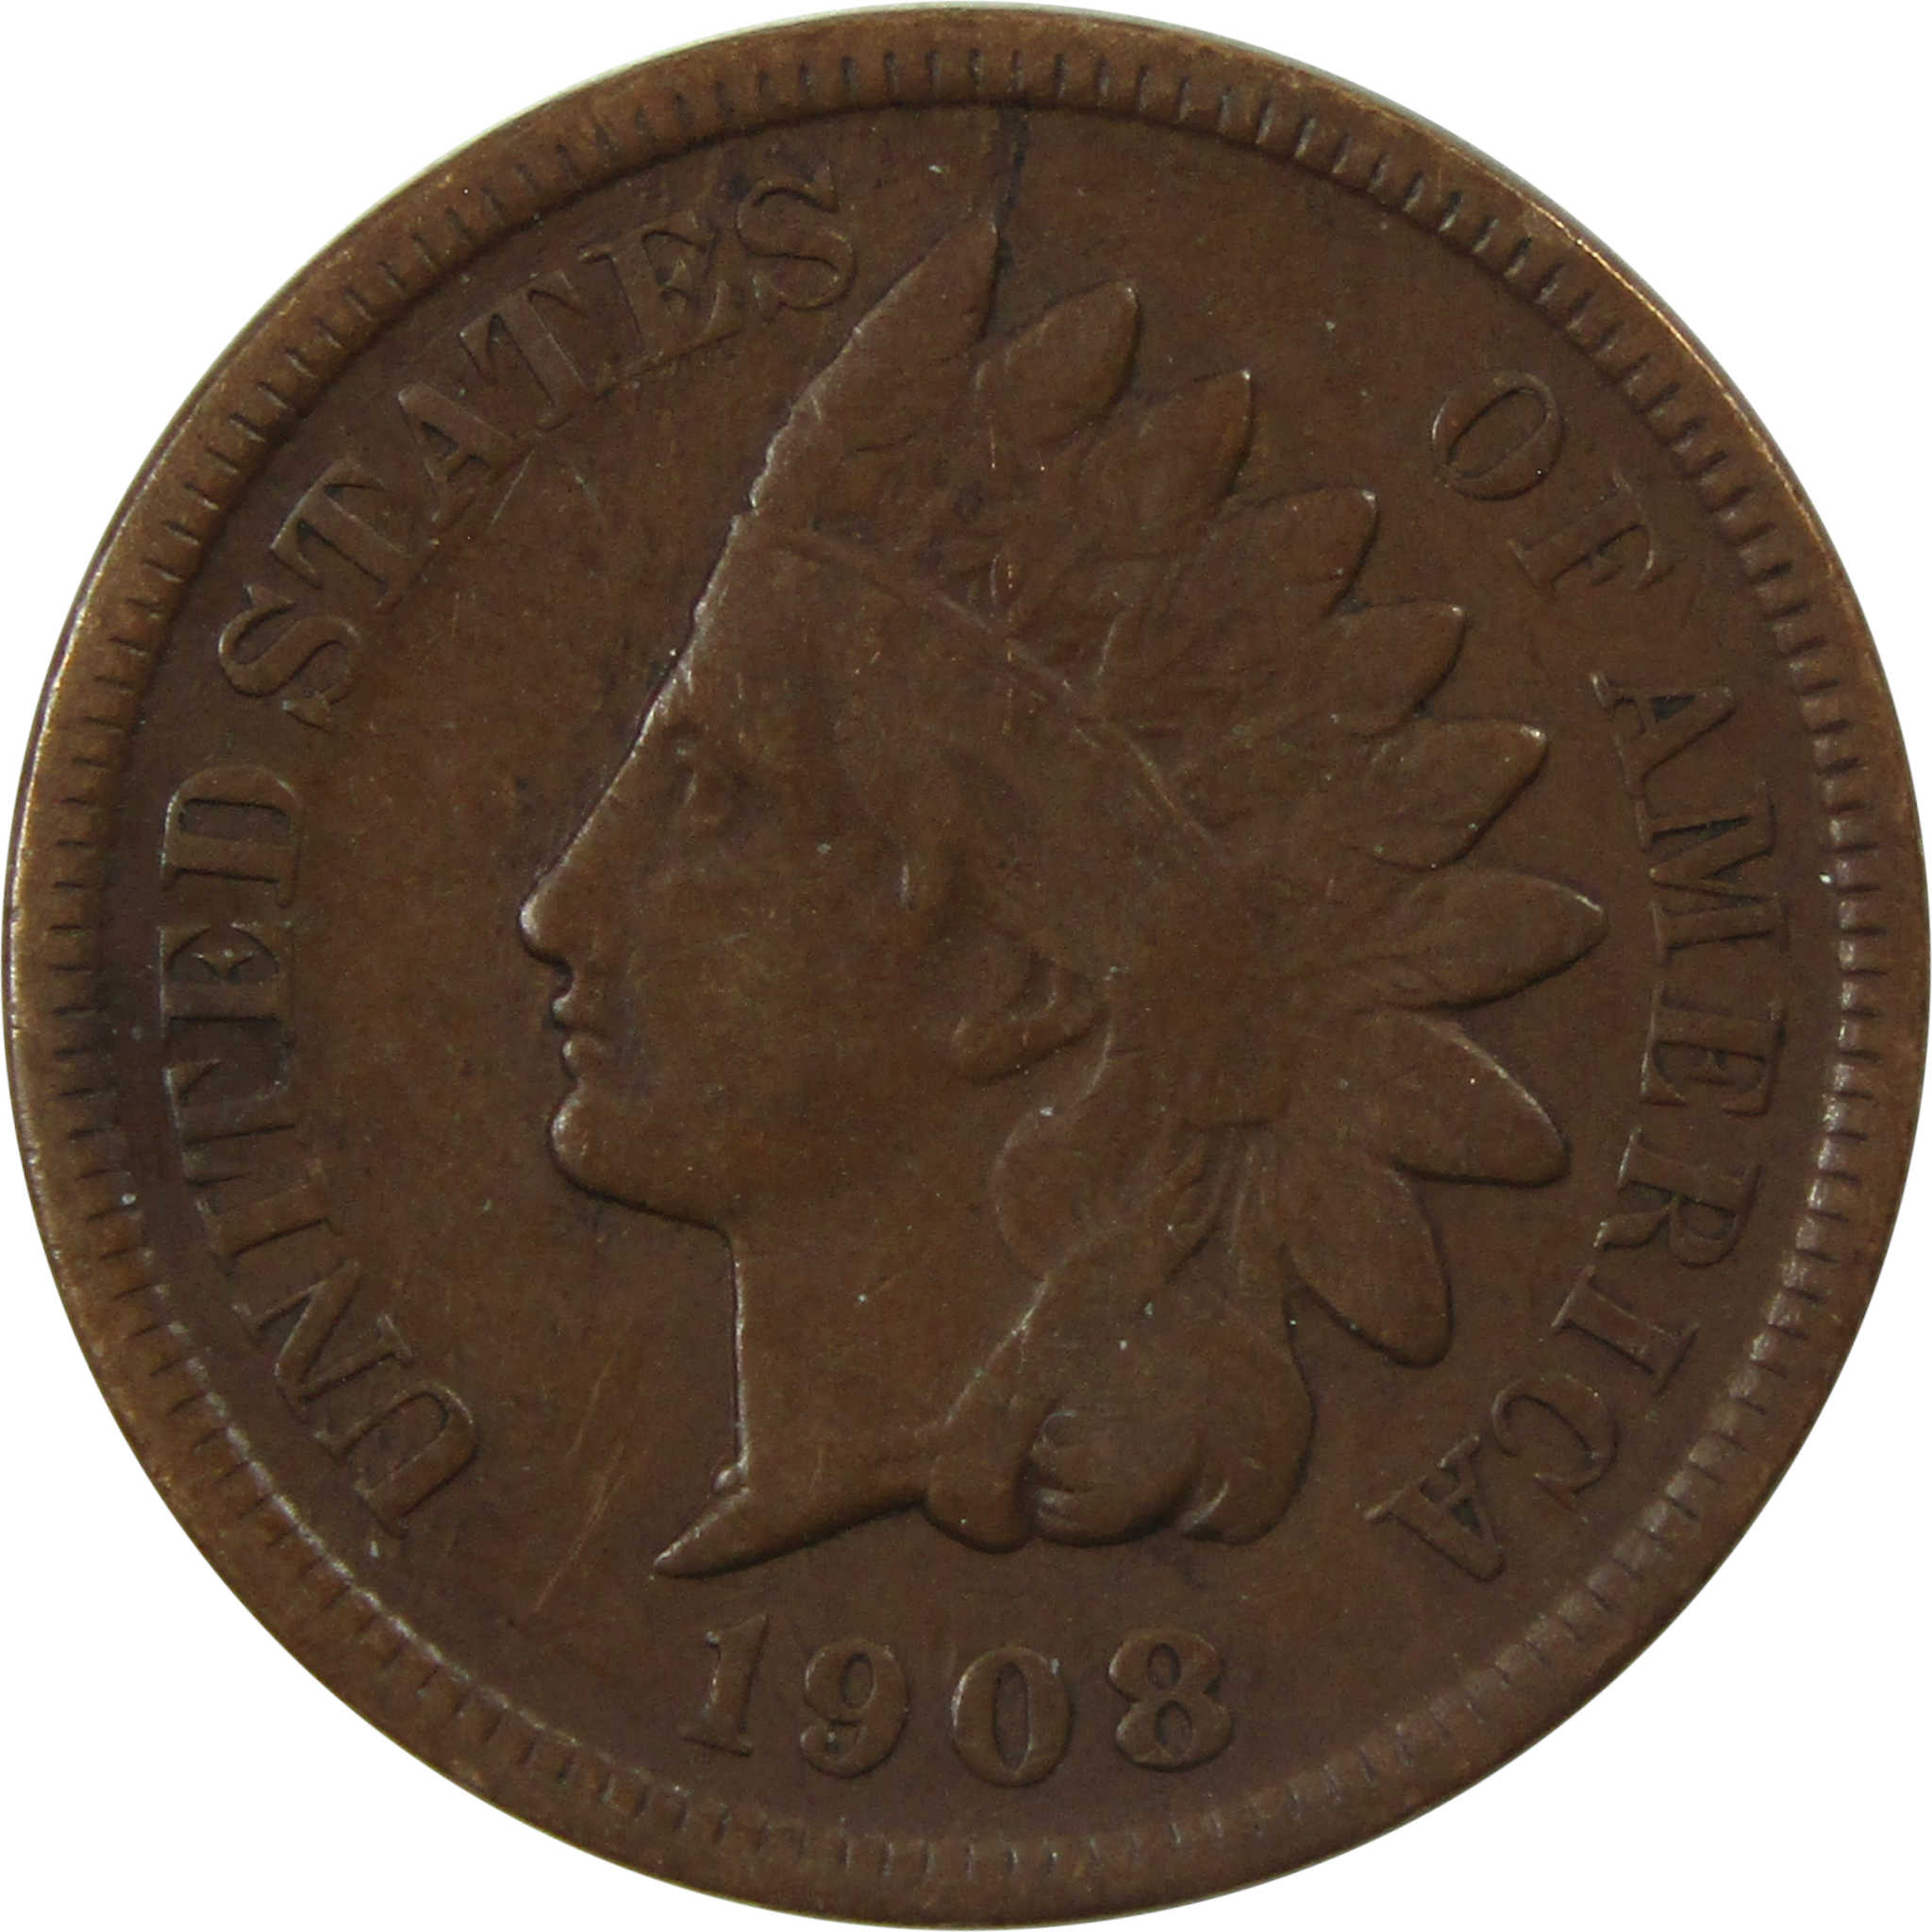 1908 S Indian Head Cent VG Very Good Details Penny 1c Coin SKU:I13658